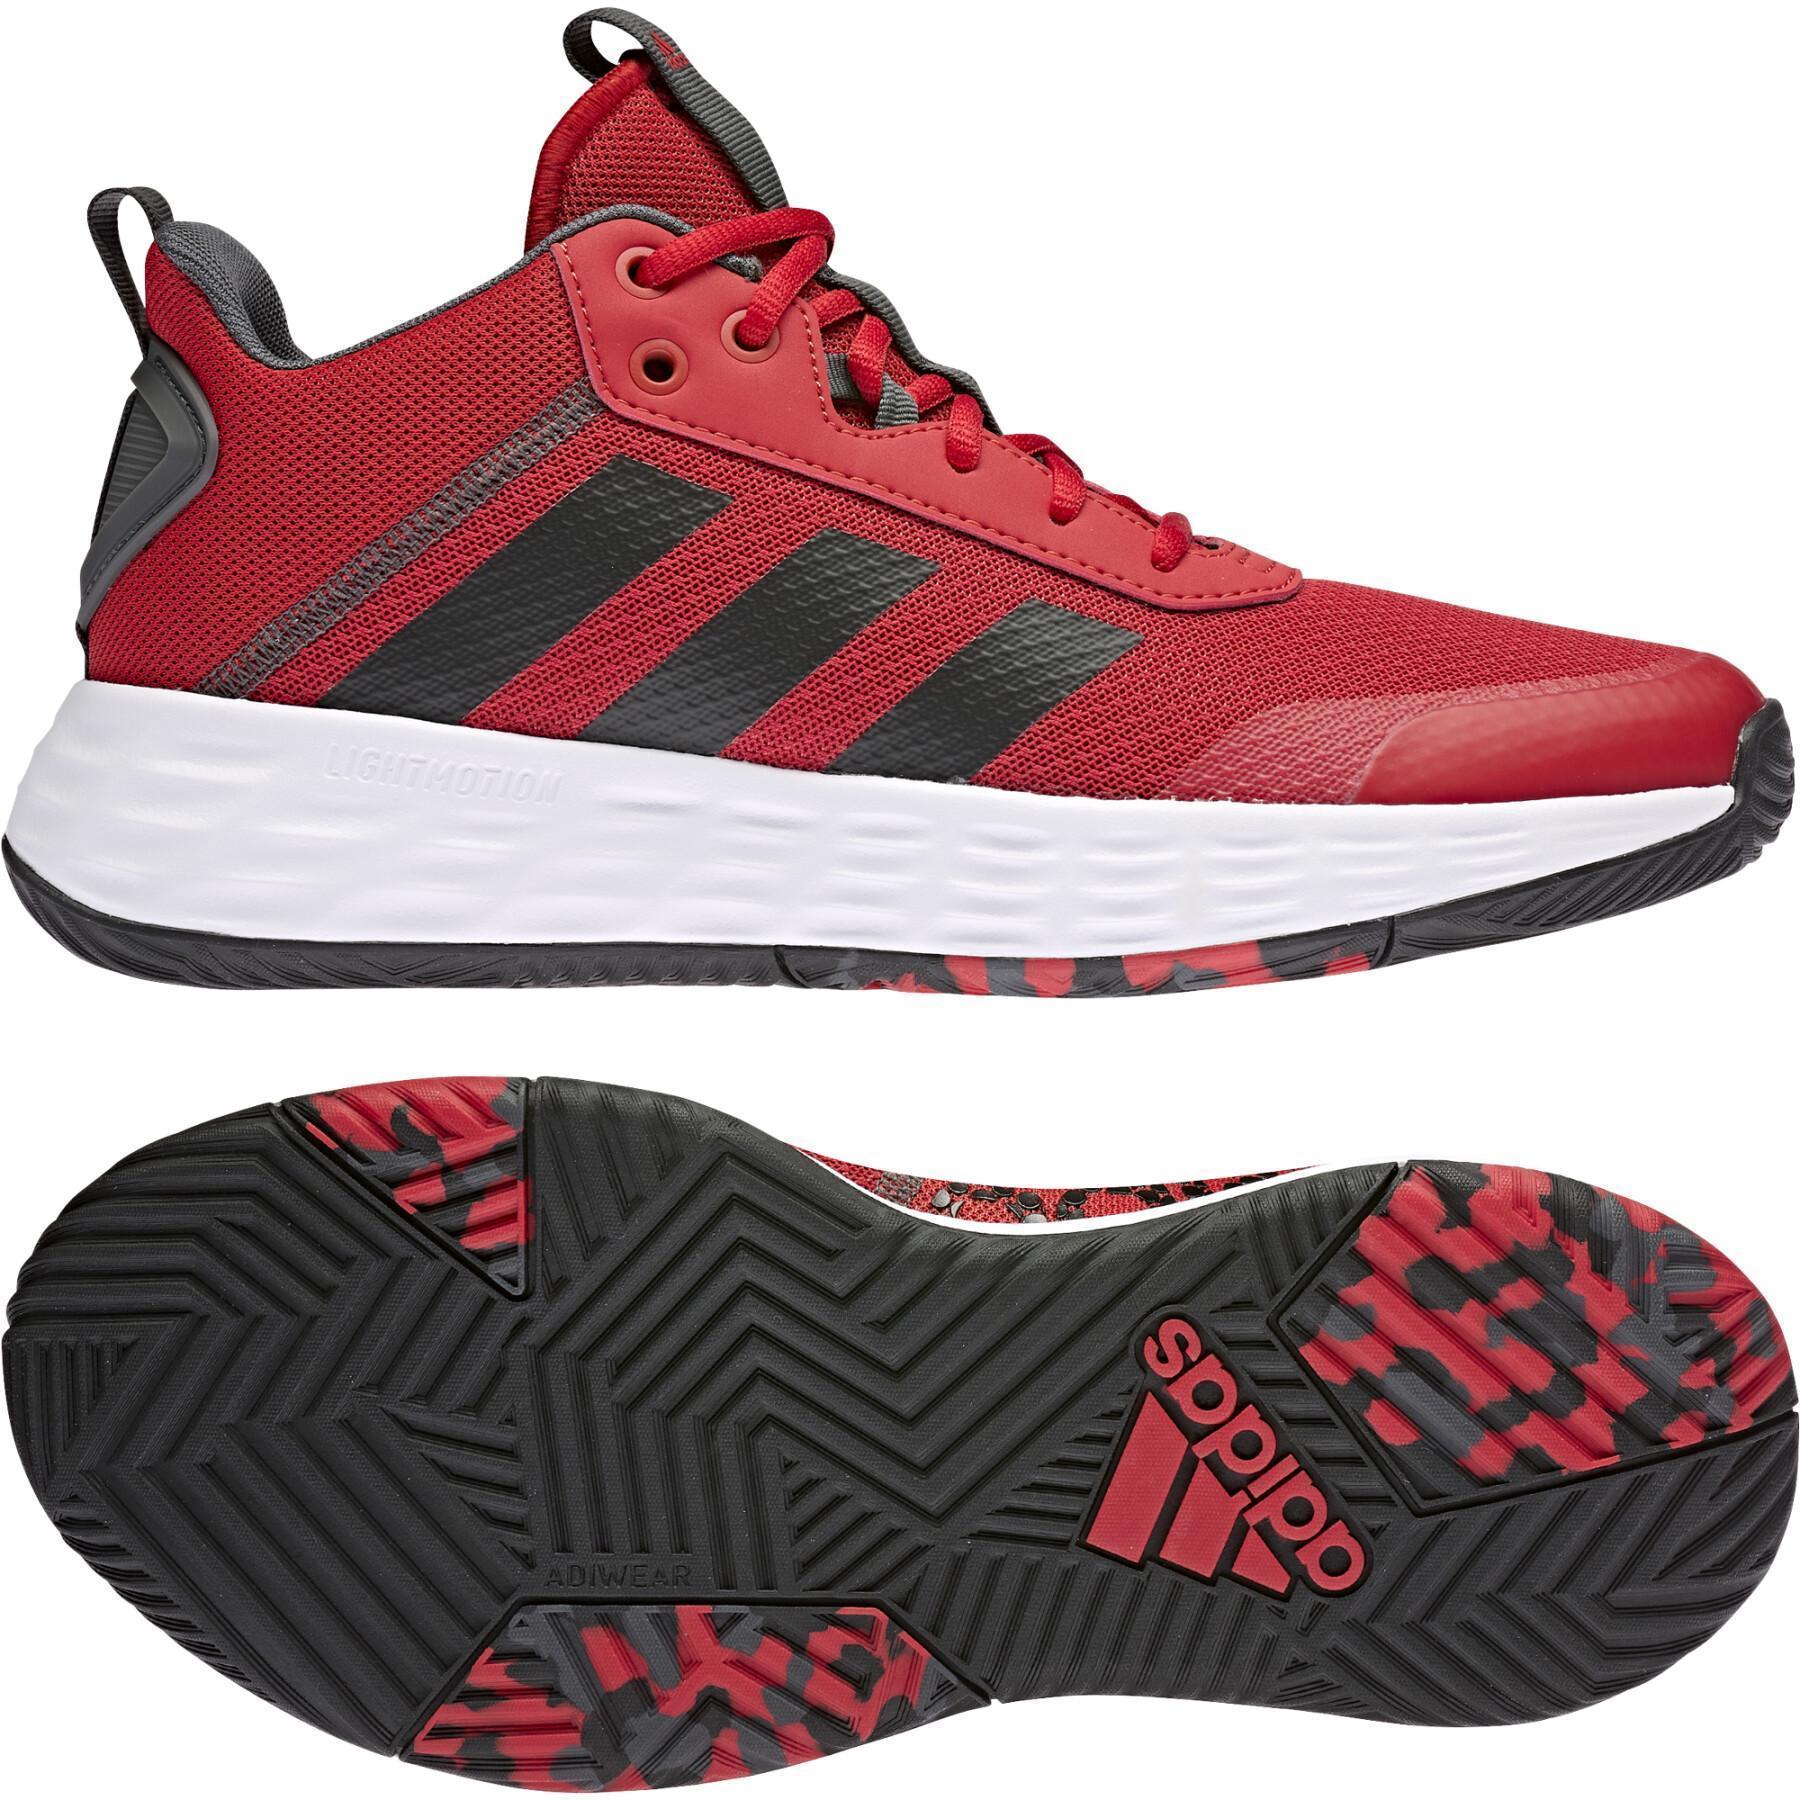 Chaussures indoor adidas Ownthegame